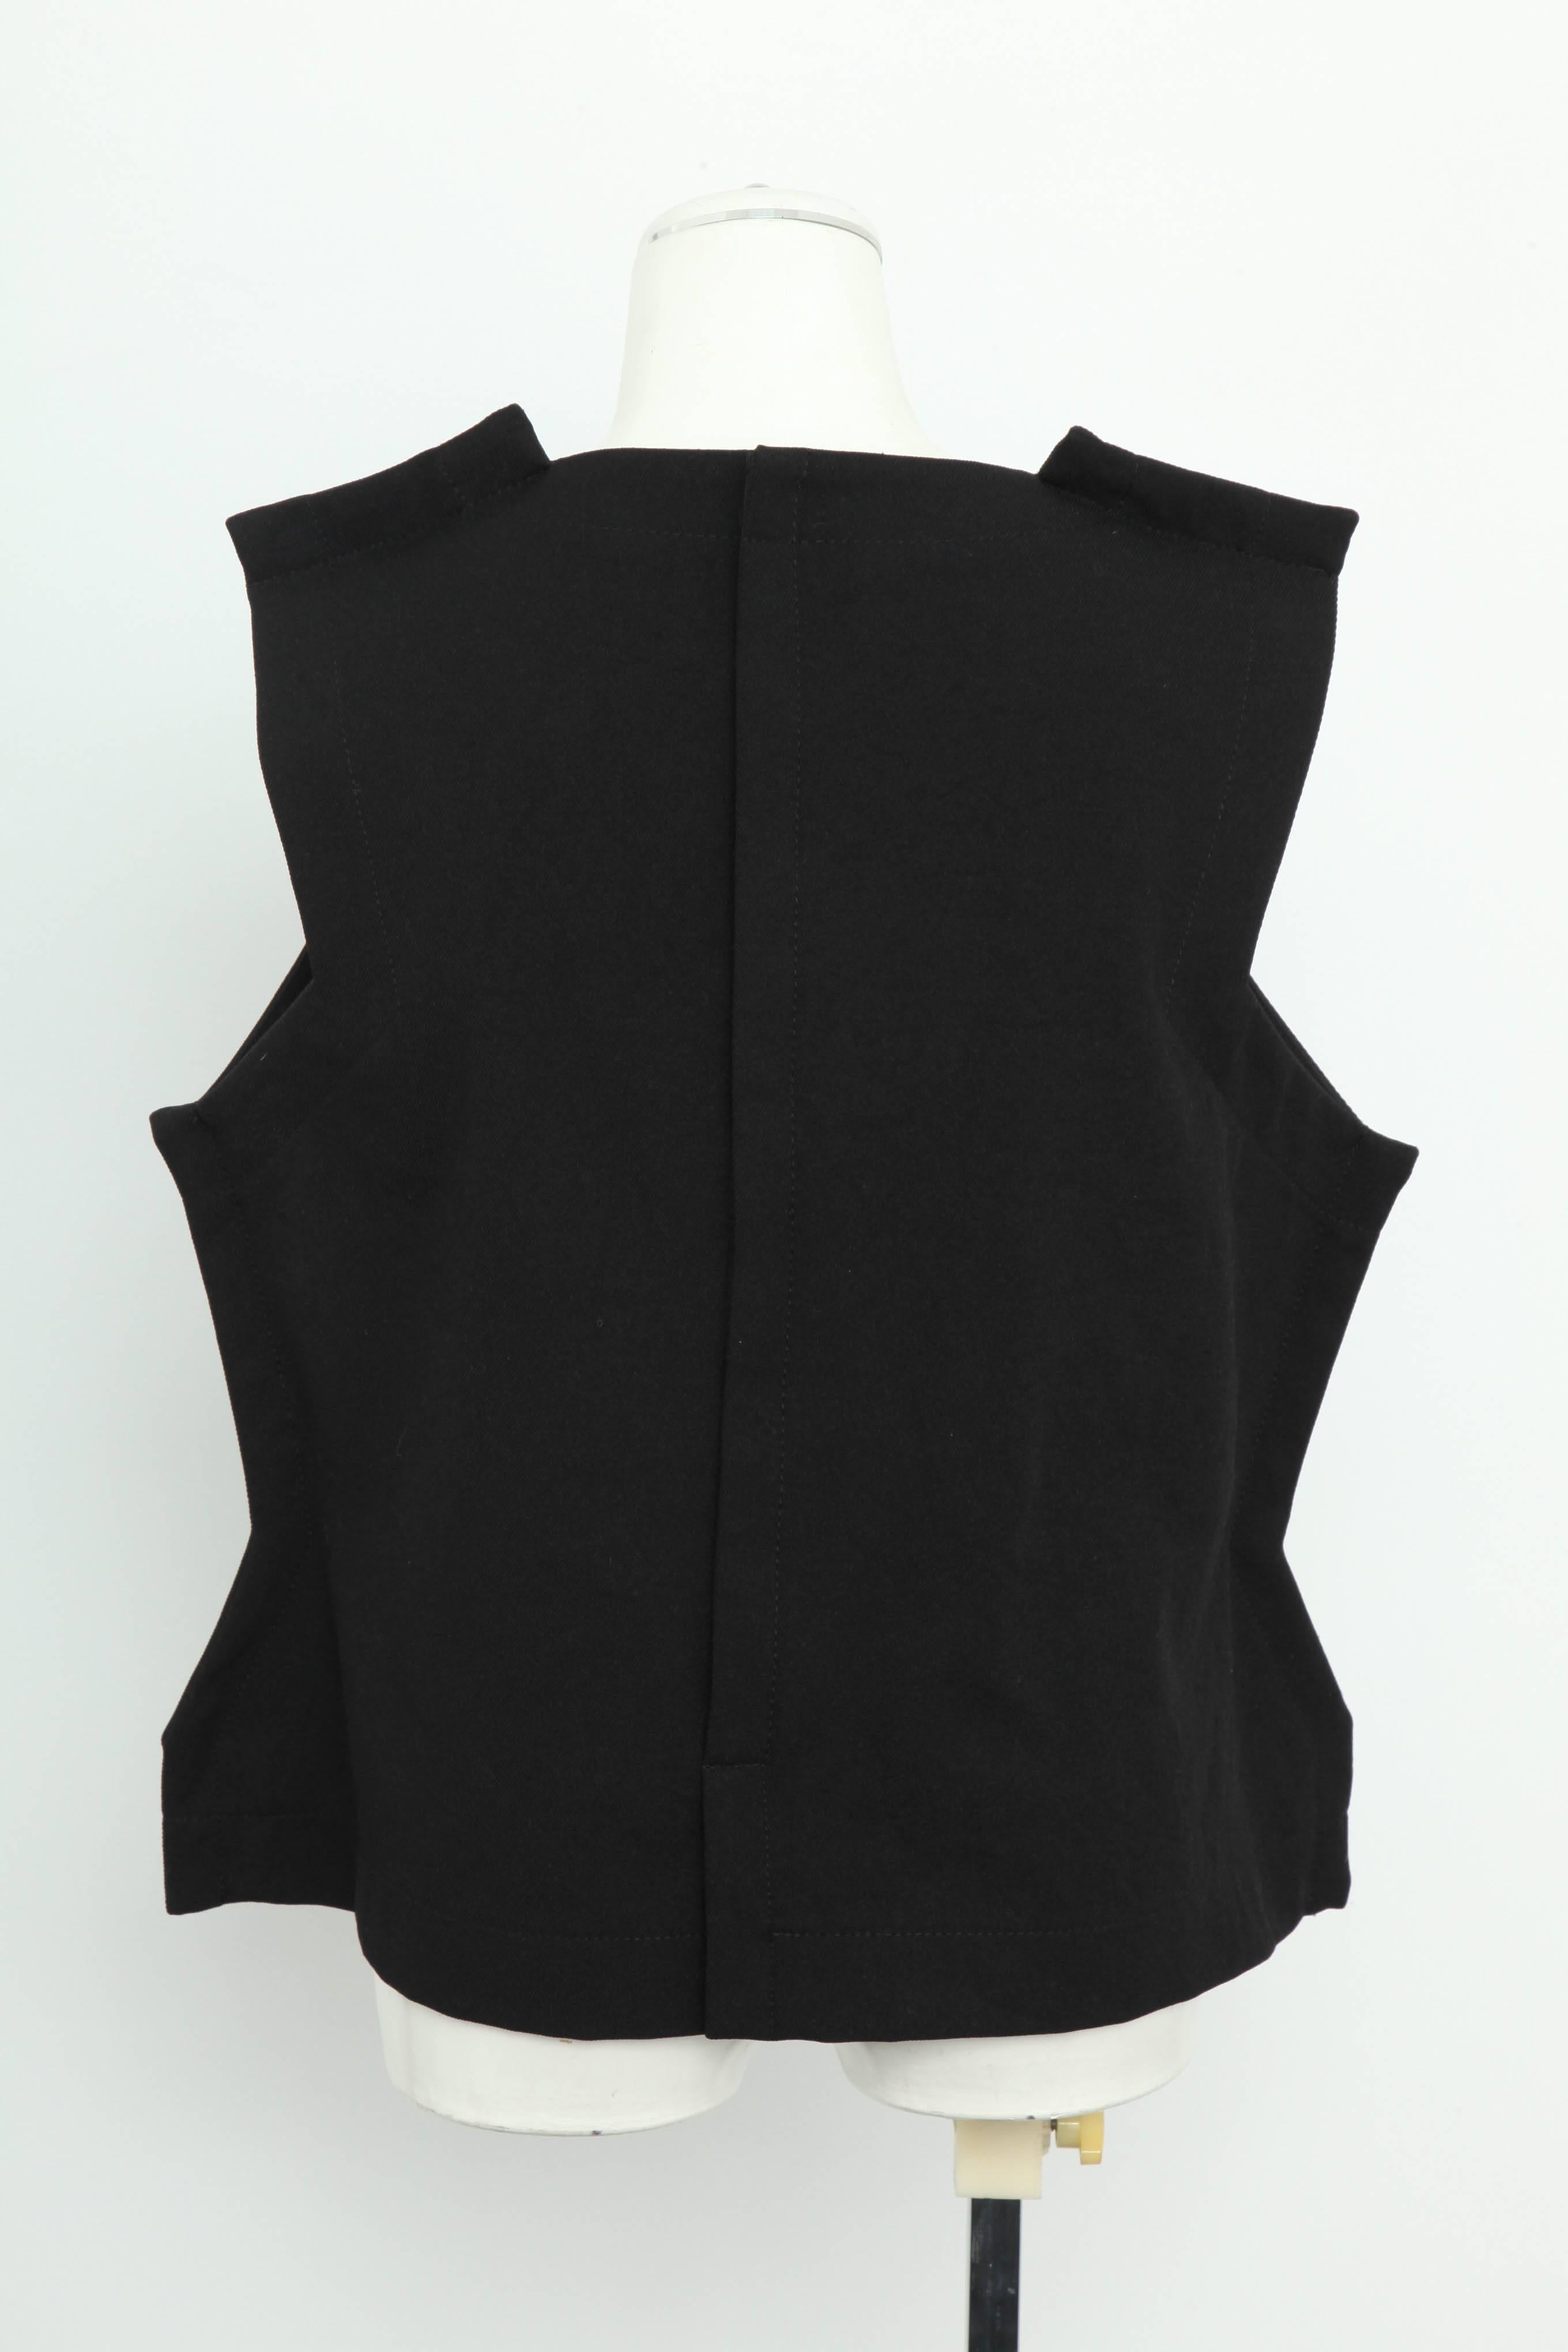 Comme Des Garcons Rare Black Top from 2 Dimensional Collection (Schwarz) im Angebot